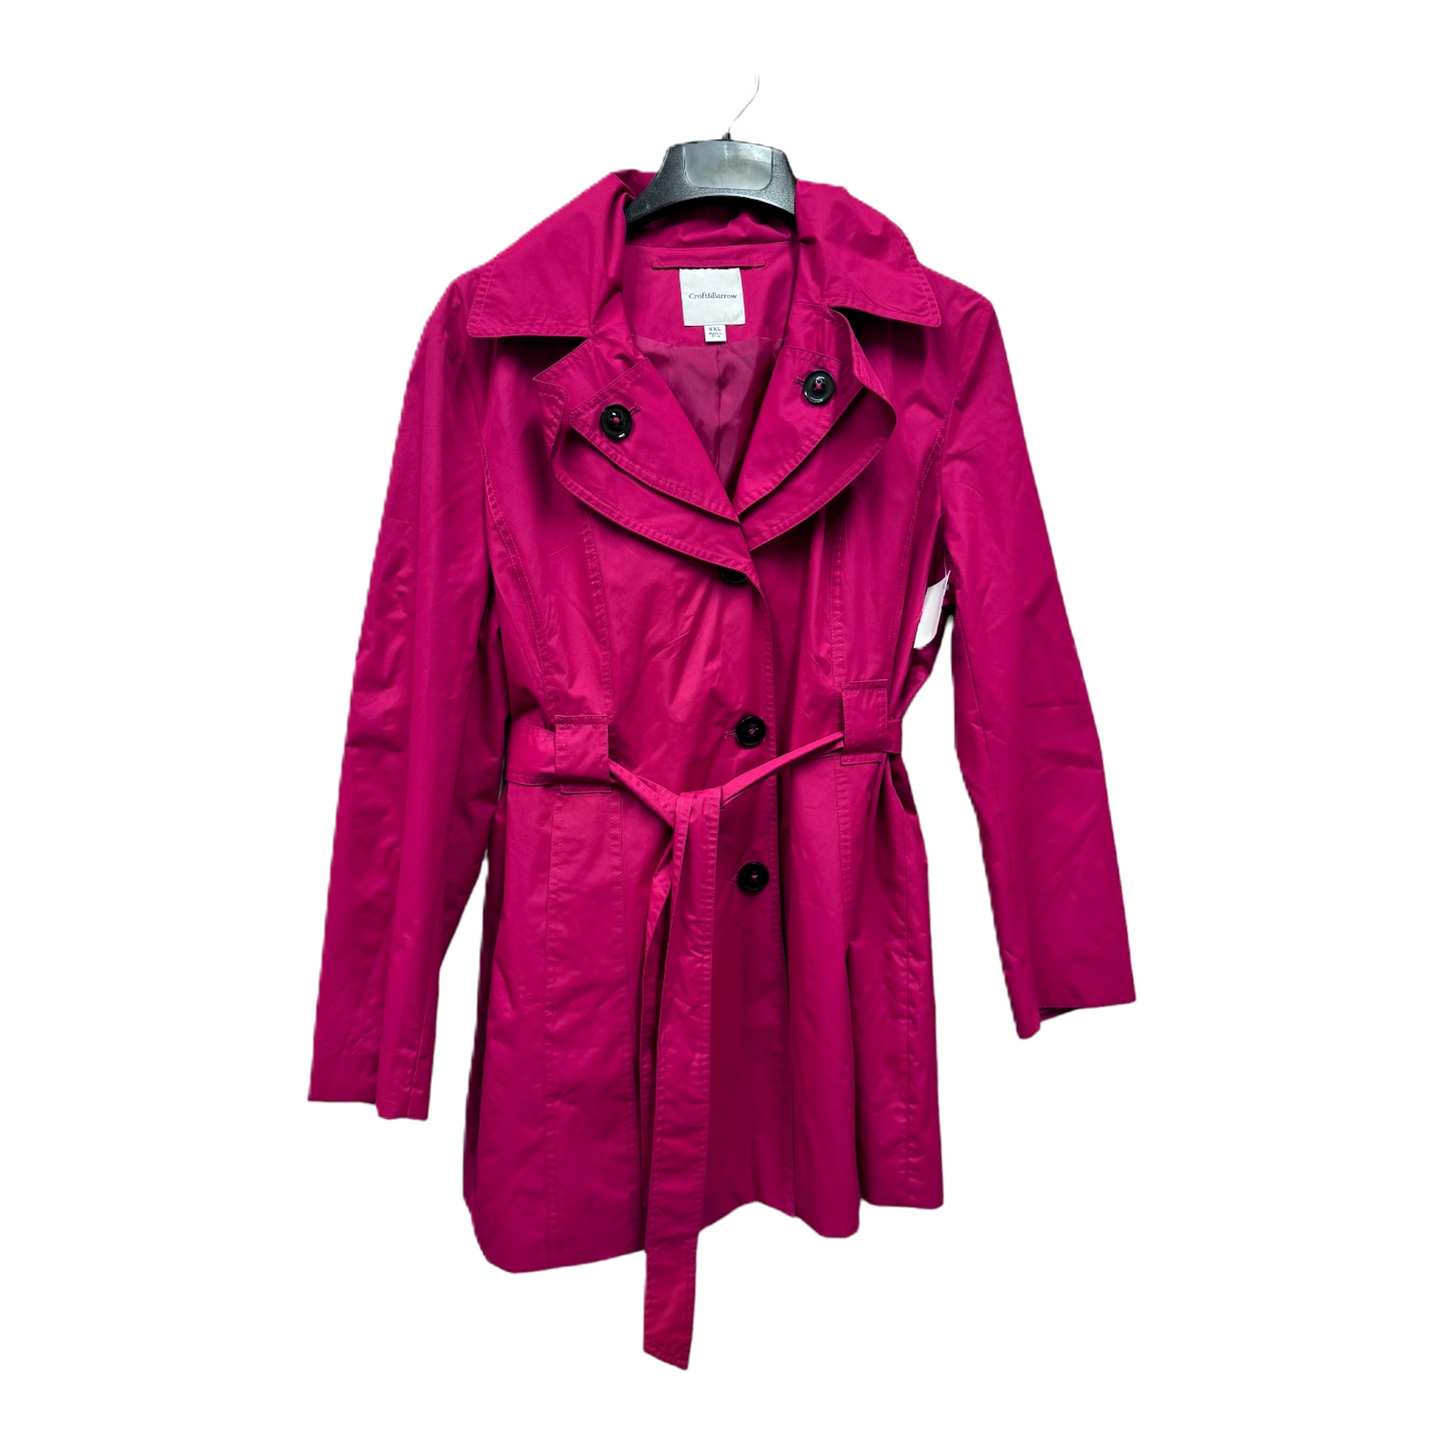 Red Coat Raincoat By Croft And Barrow, Size: 1x